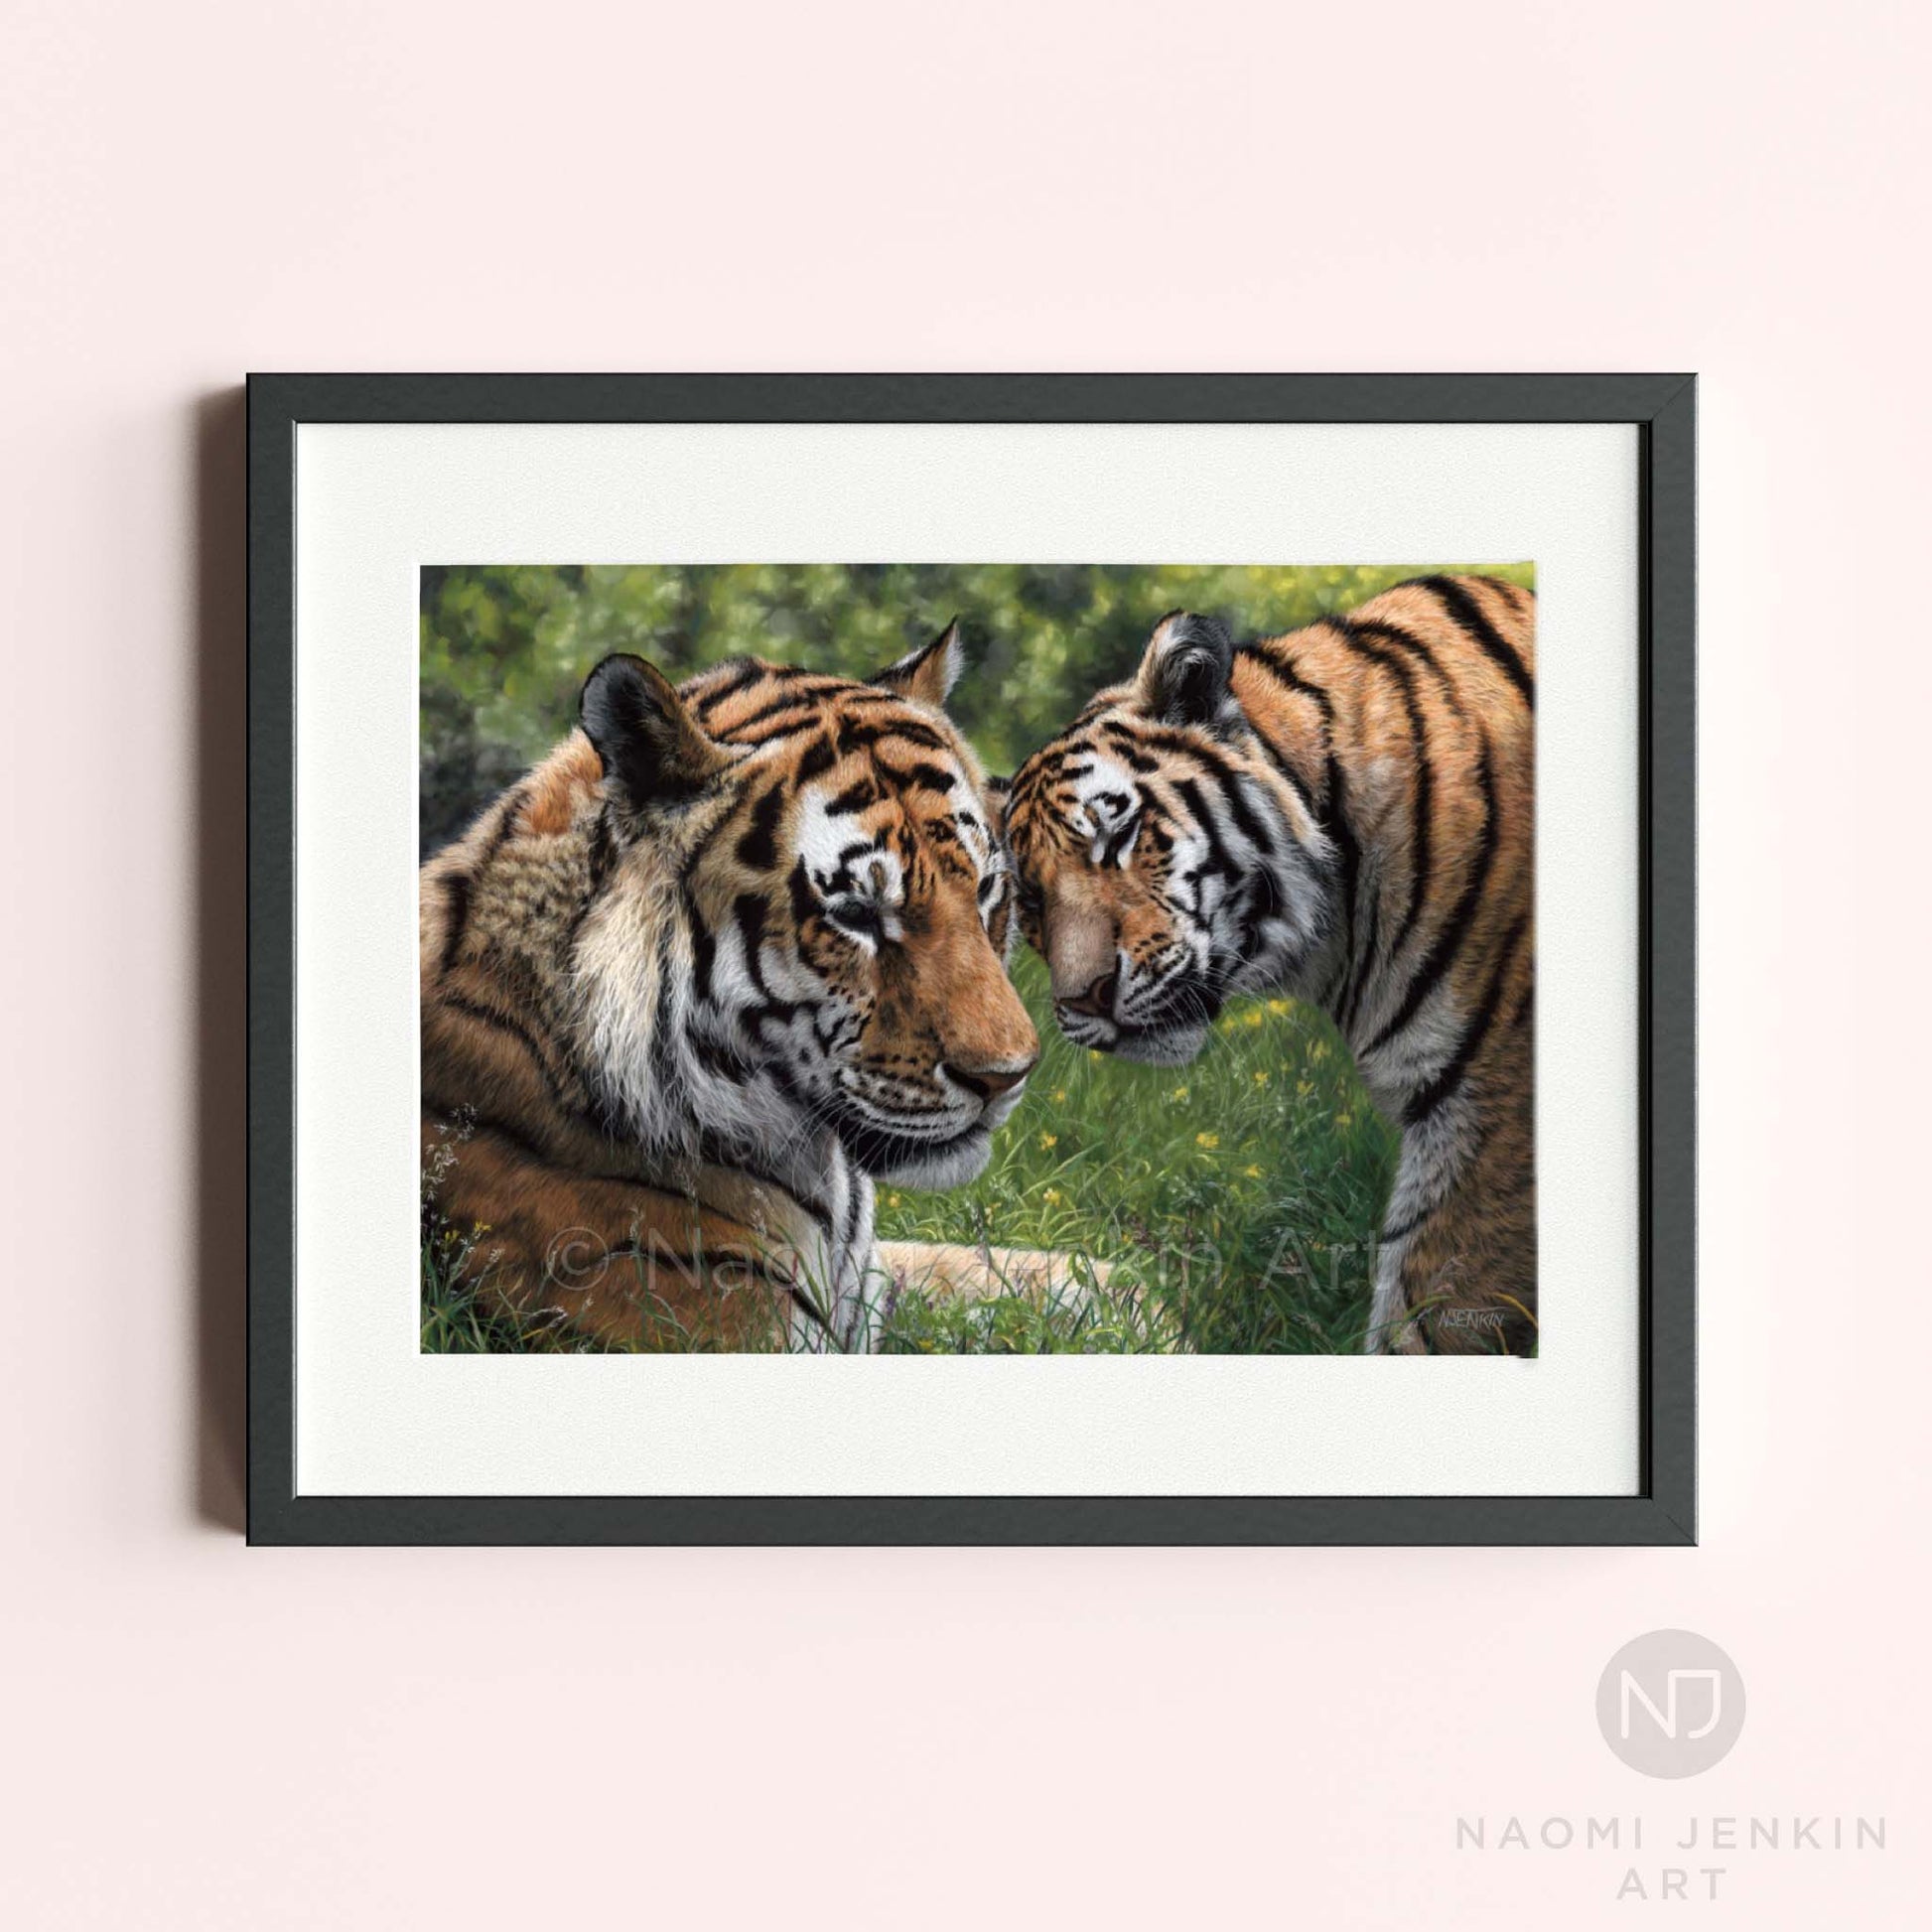 Framed tiger art print produced from an original pastel painting by wildlife artist Naomi Jenkin